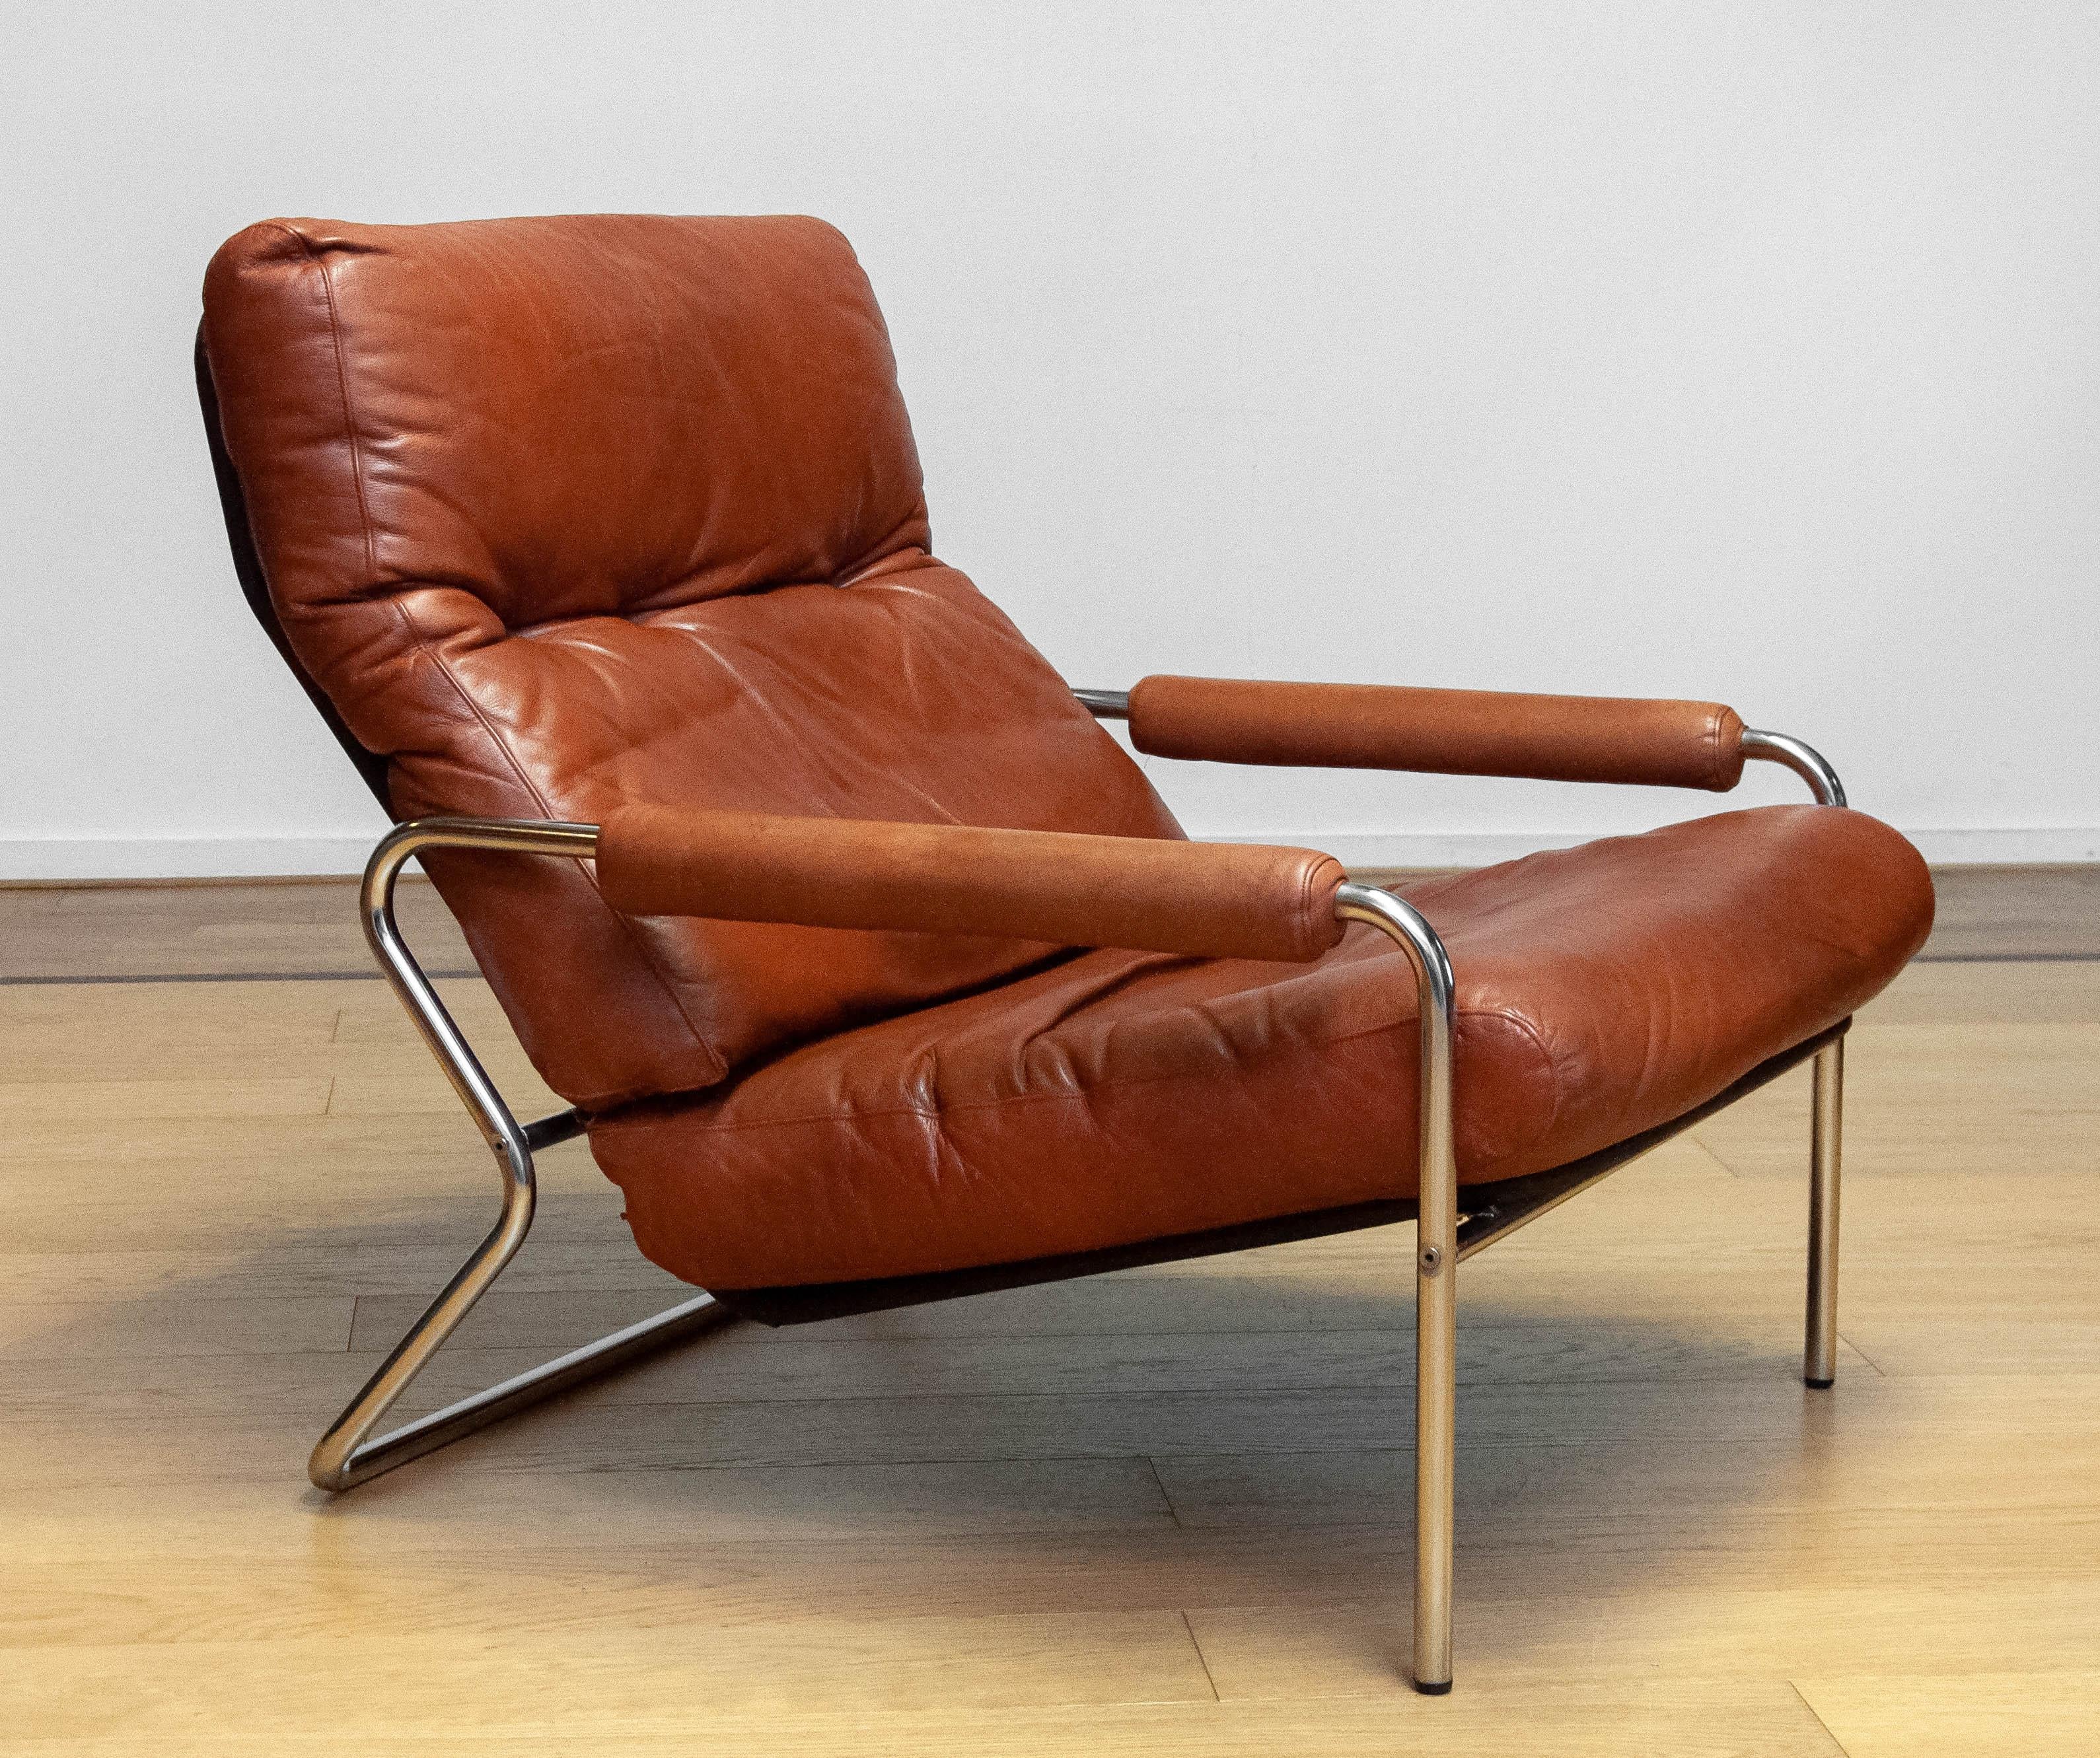 Beautiful tubular lounge chair with brown leather cushions and brown leather armrests from the 1960s made in Sweden.
The leather is in good condition even as the fillings and therefor the chair sits very comfortable.
The metal frame as well as the